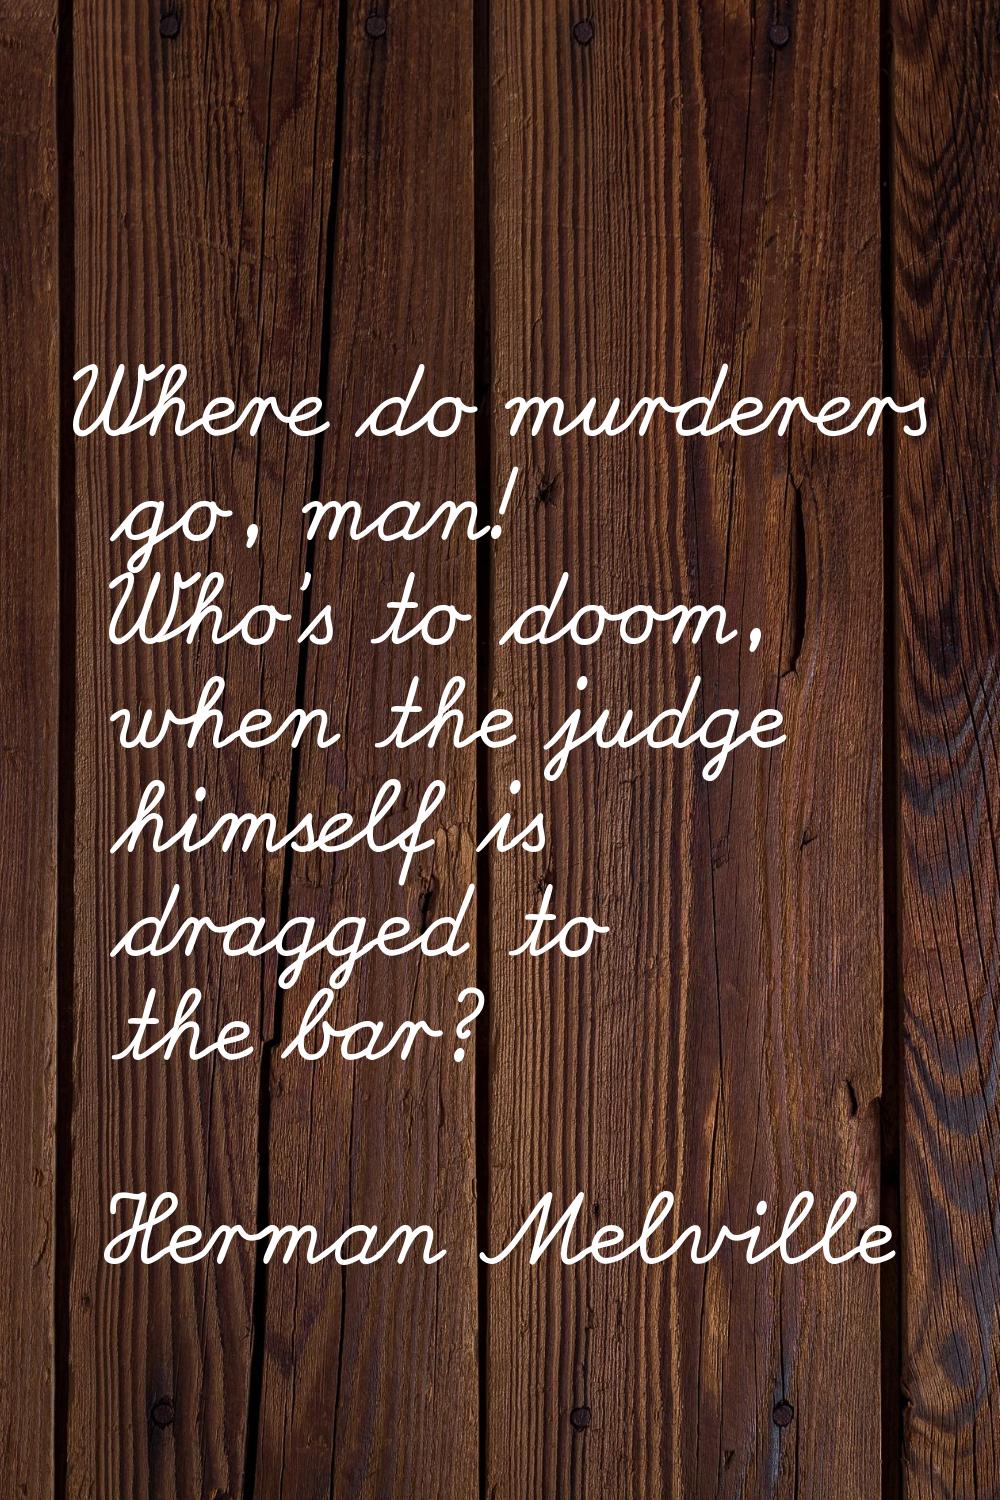 Where do murderers go, man! Who's to doom, when the judge himself is dragged to the bar?